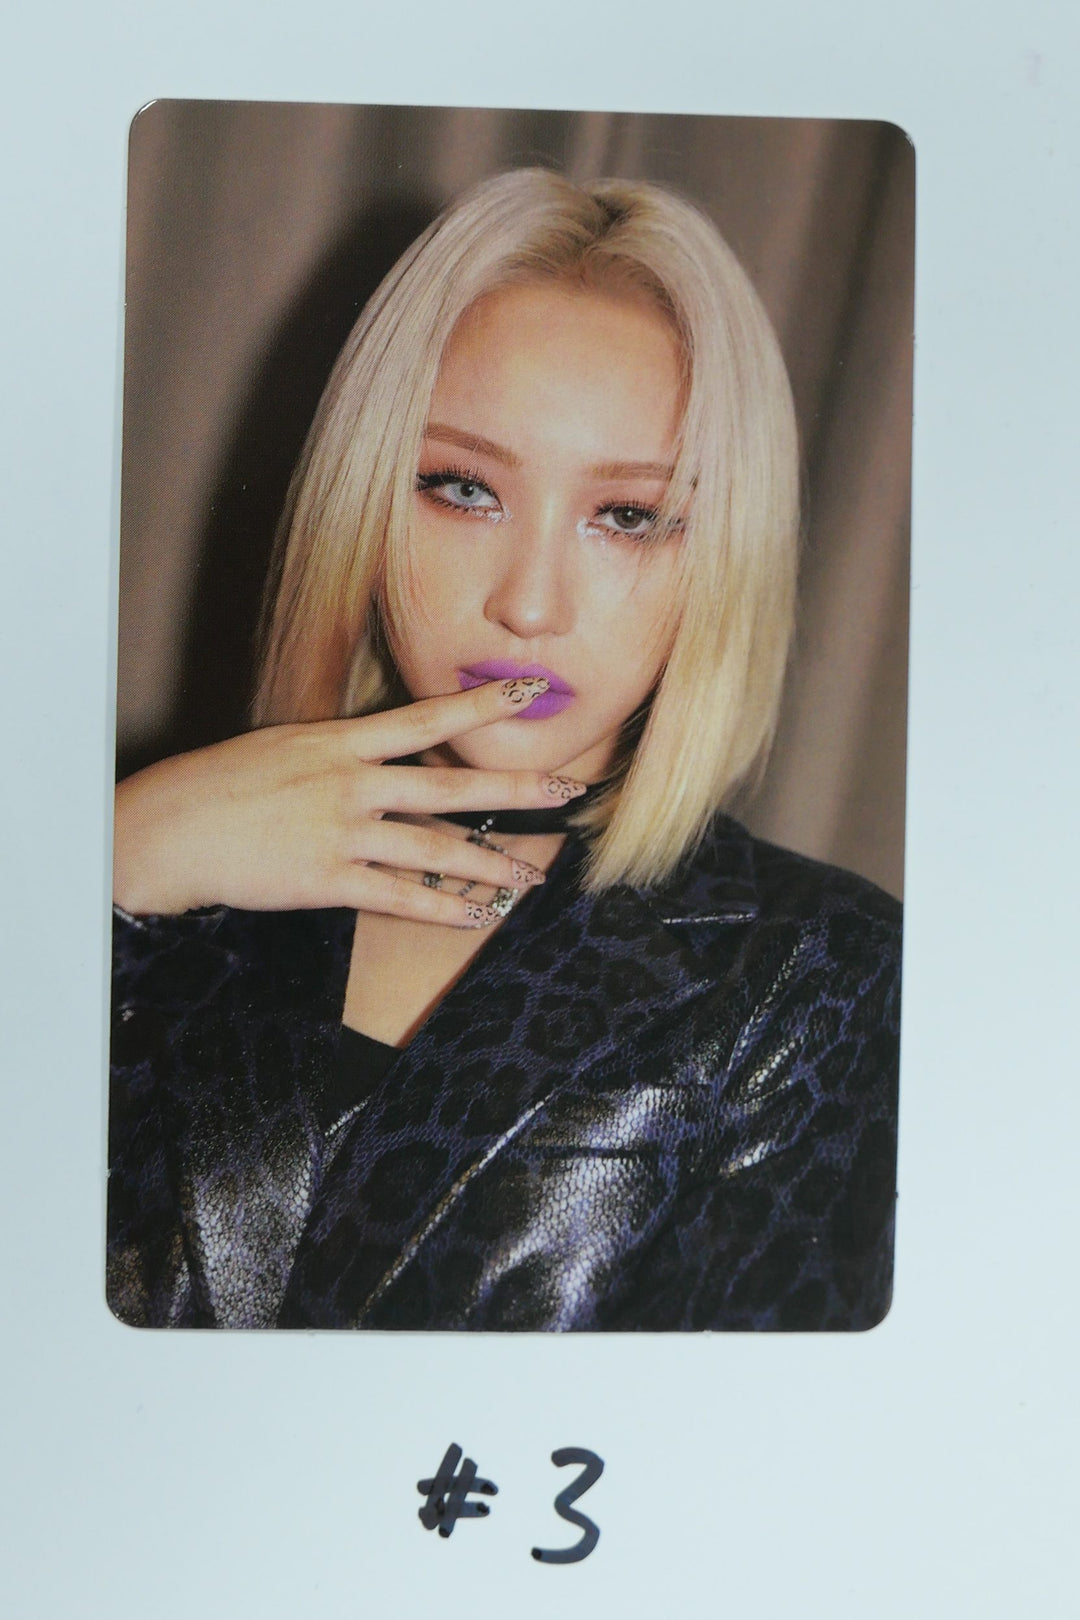 Dreamcatcher "Road To Utopia" - SIYEON Official Photocard